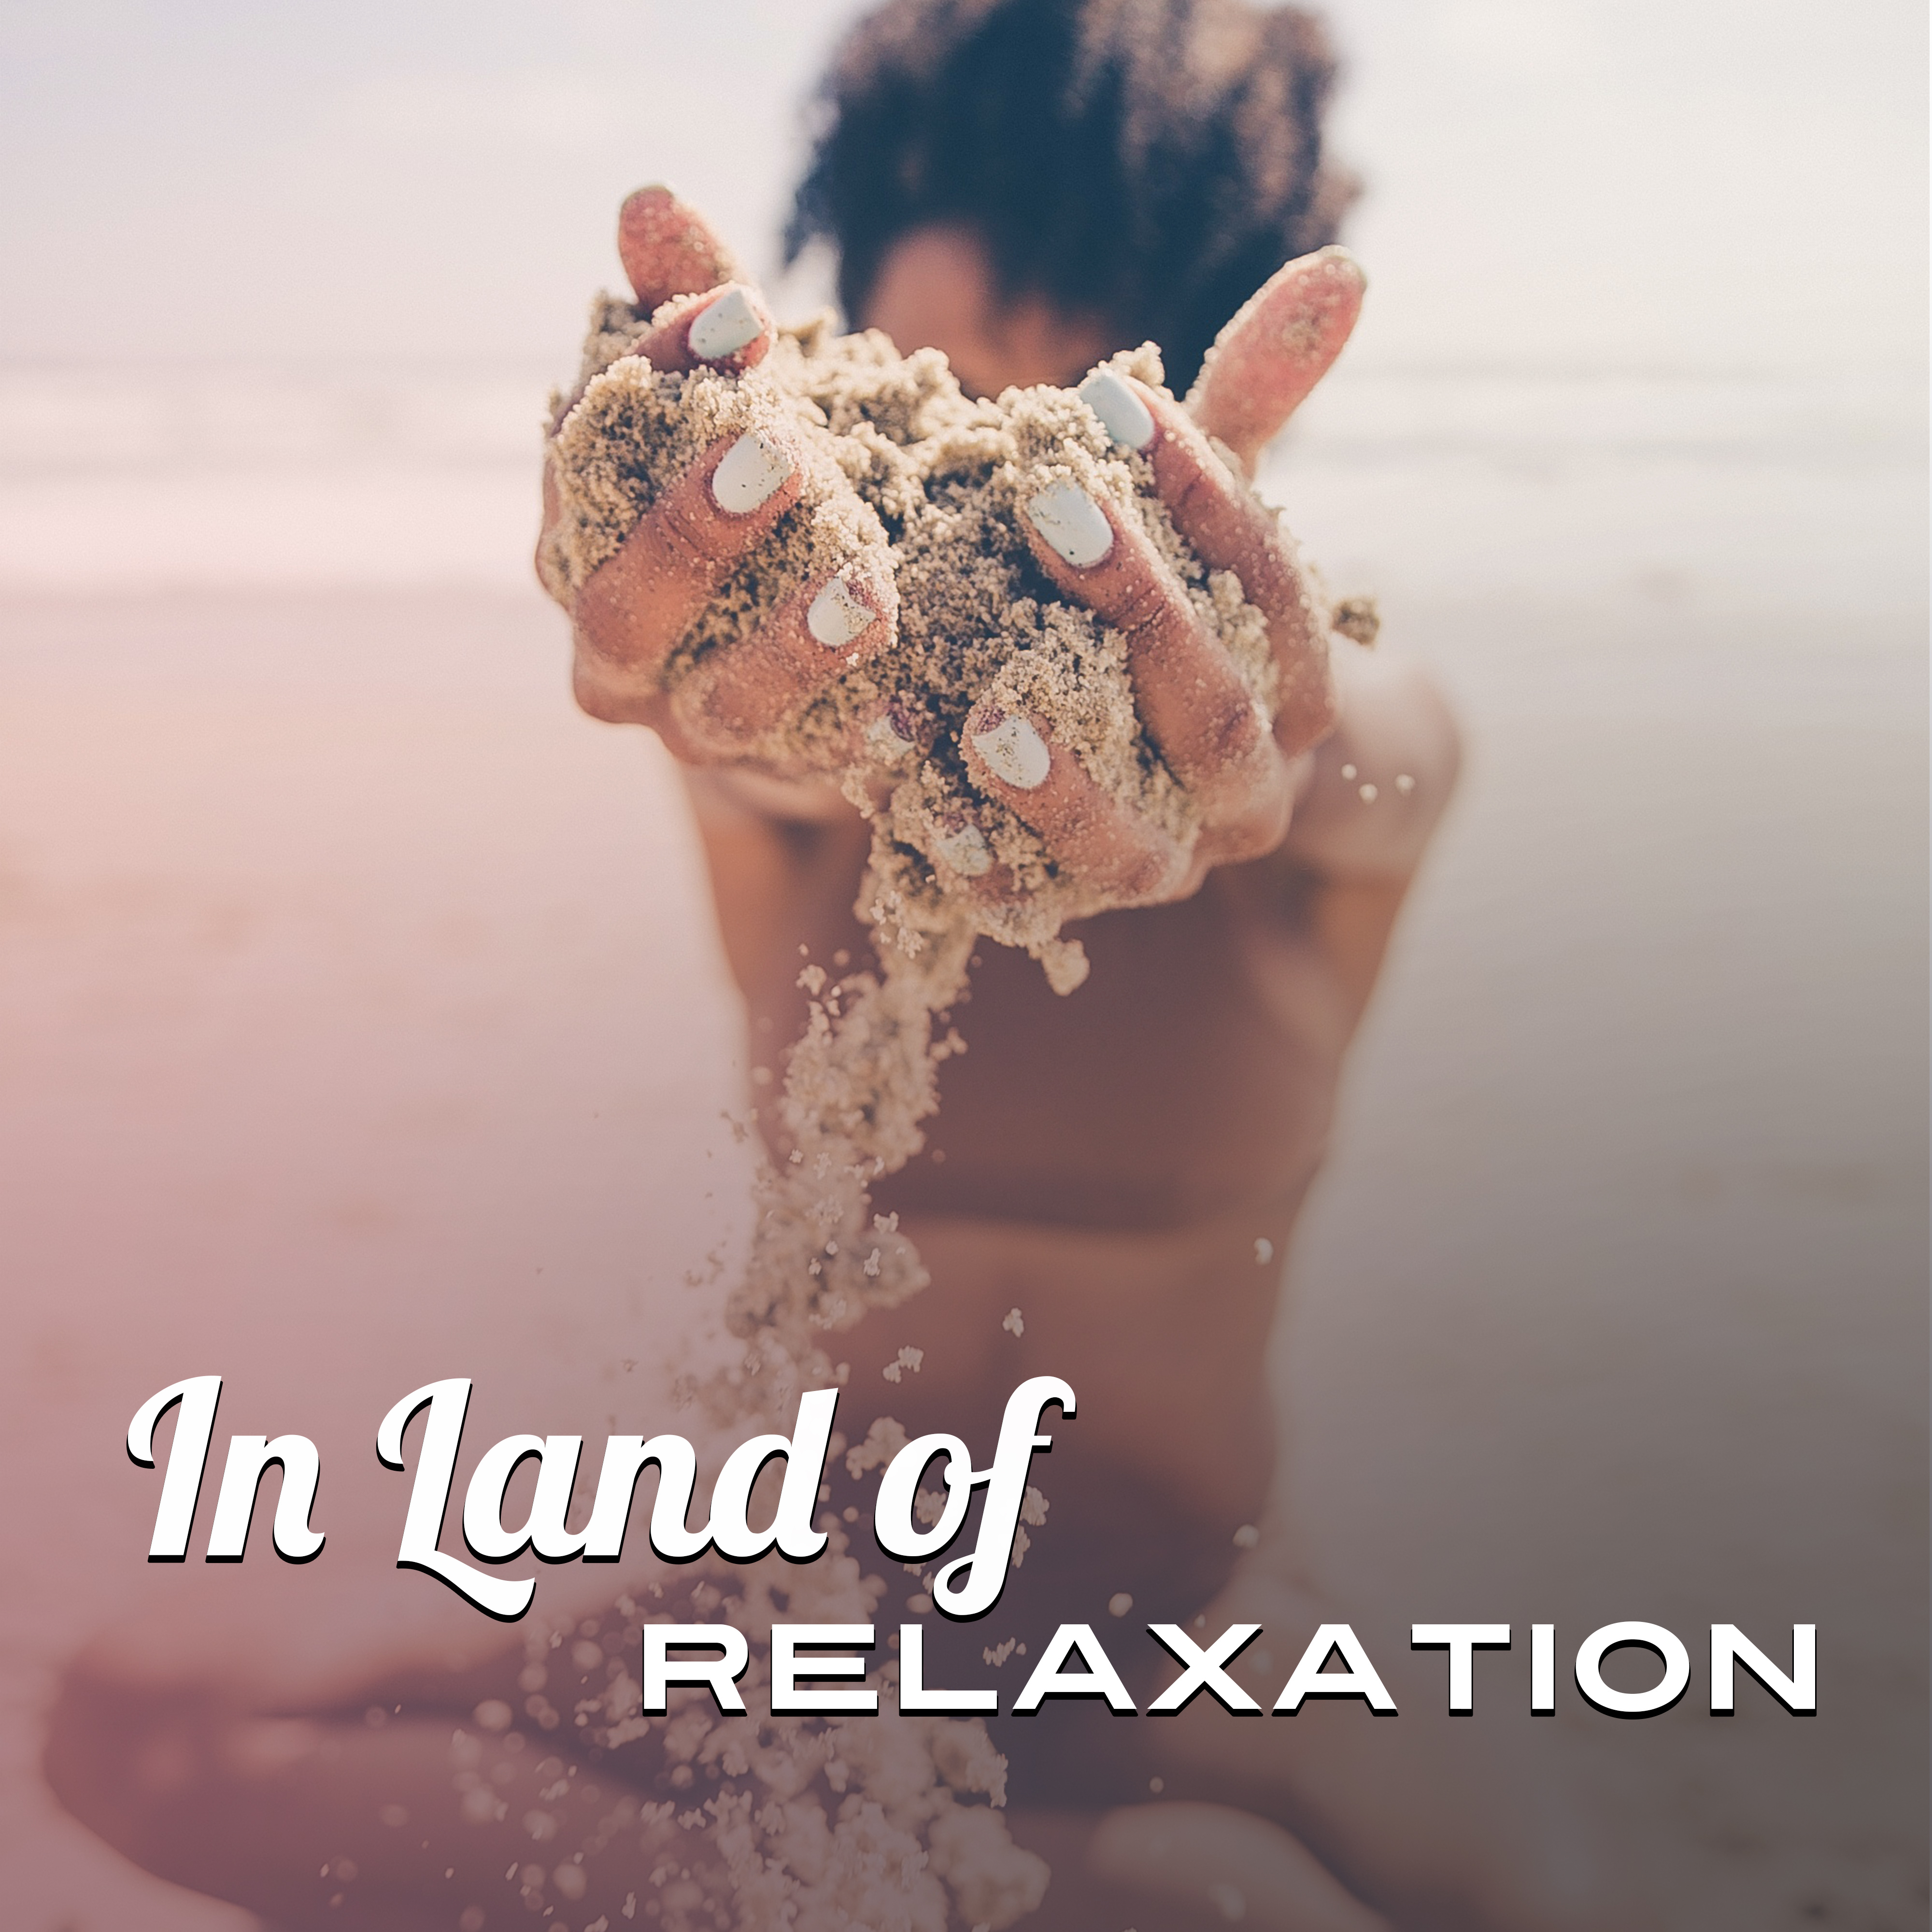 In Land of Relaxation  Holiday Songs, Summer Lounge, Ibiza Chill, Relaxing Waves, Chillout Music, Relaxation Time on the Beach